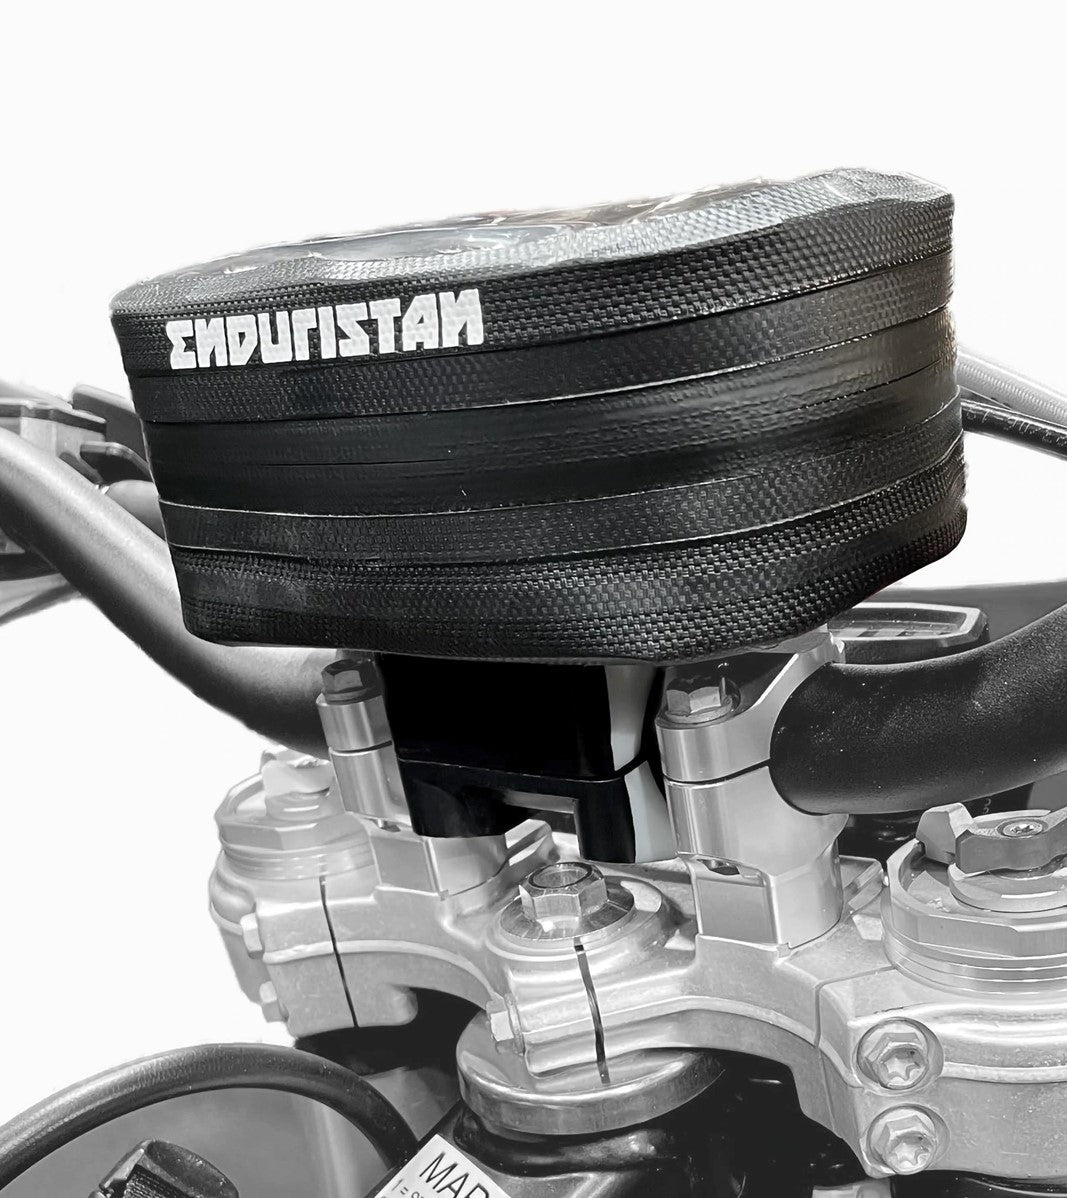 Enduristan USA, Handlebar Bag (Small), LUHA-001, adventure bike luggage, adventure luggage, dirt bike luggage, dirtbike luggage, enduristan, enduro luggage, handlebar bag, luggage, motorbike bags, motorbike luggage, off road luggage, overland travel, packs and duffles, soft motorcycle luggage, soft motorcycle panniers, soft saddle bags enduro, waterproof, waterproof enduro bags, waterproof motorcycle luggage, Handlebar Bags - World’s toughest waterproof luggage designed for adventure sports riders and enthu